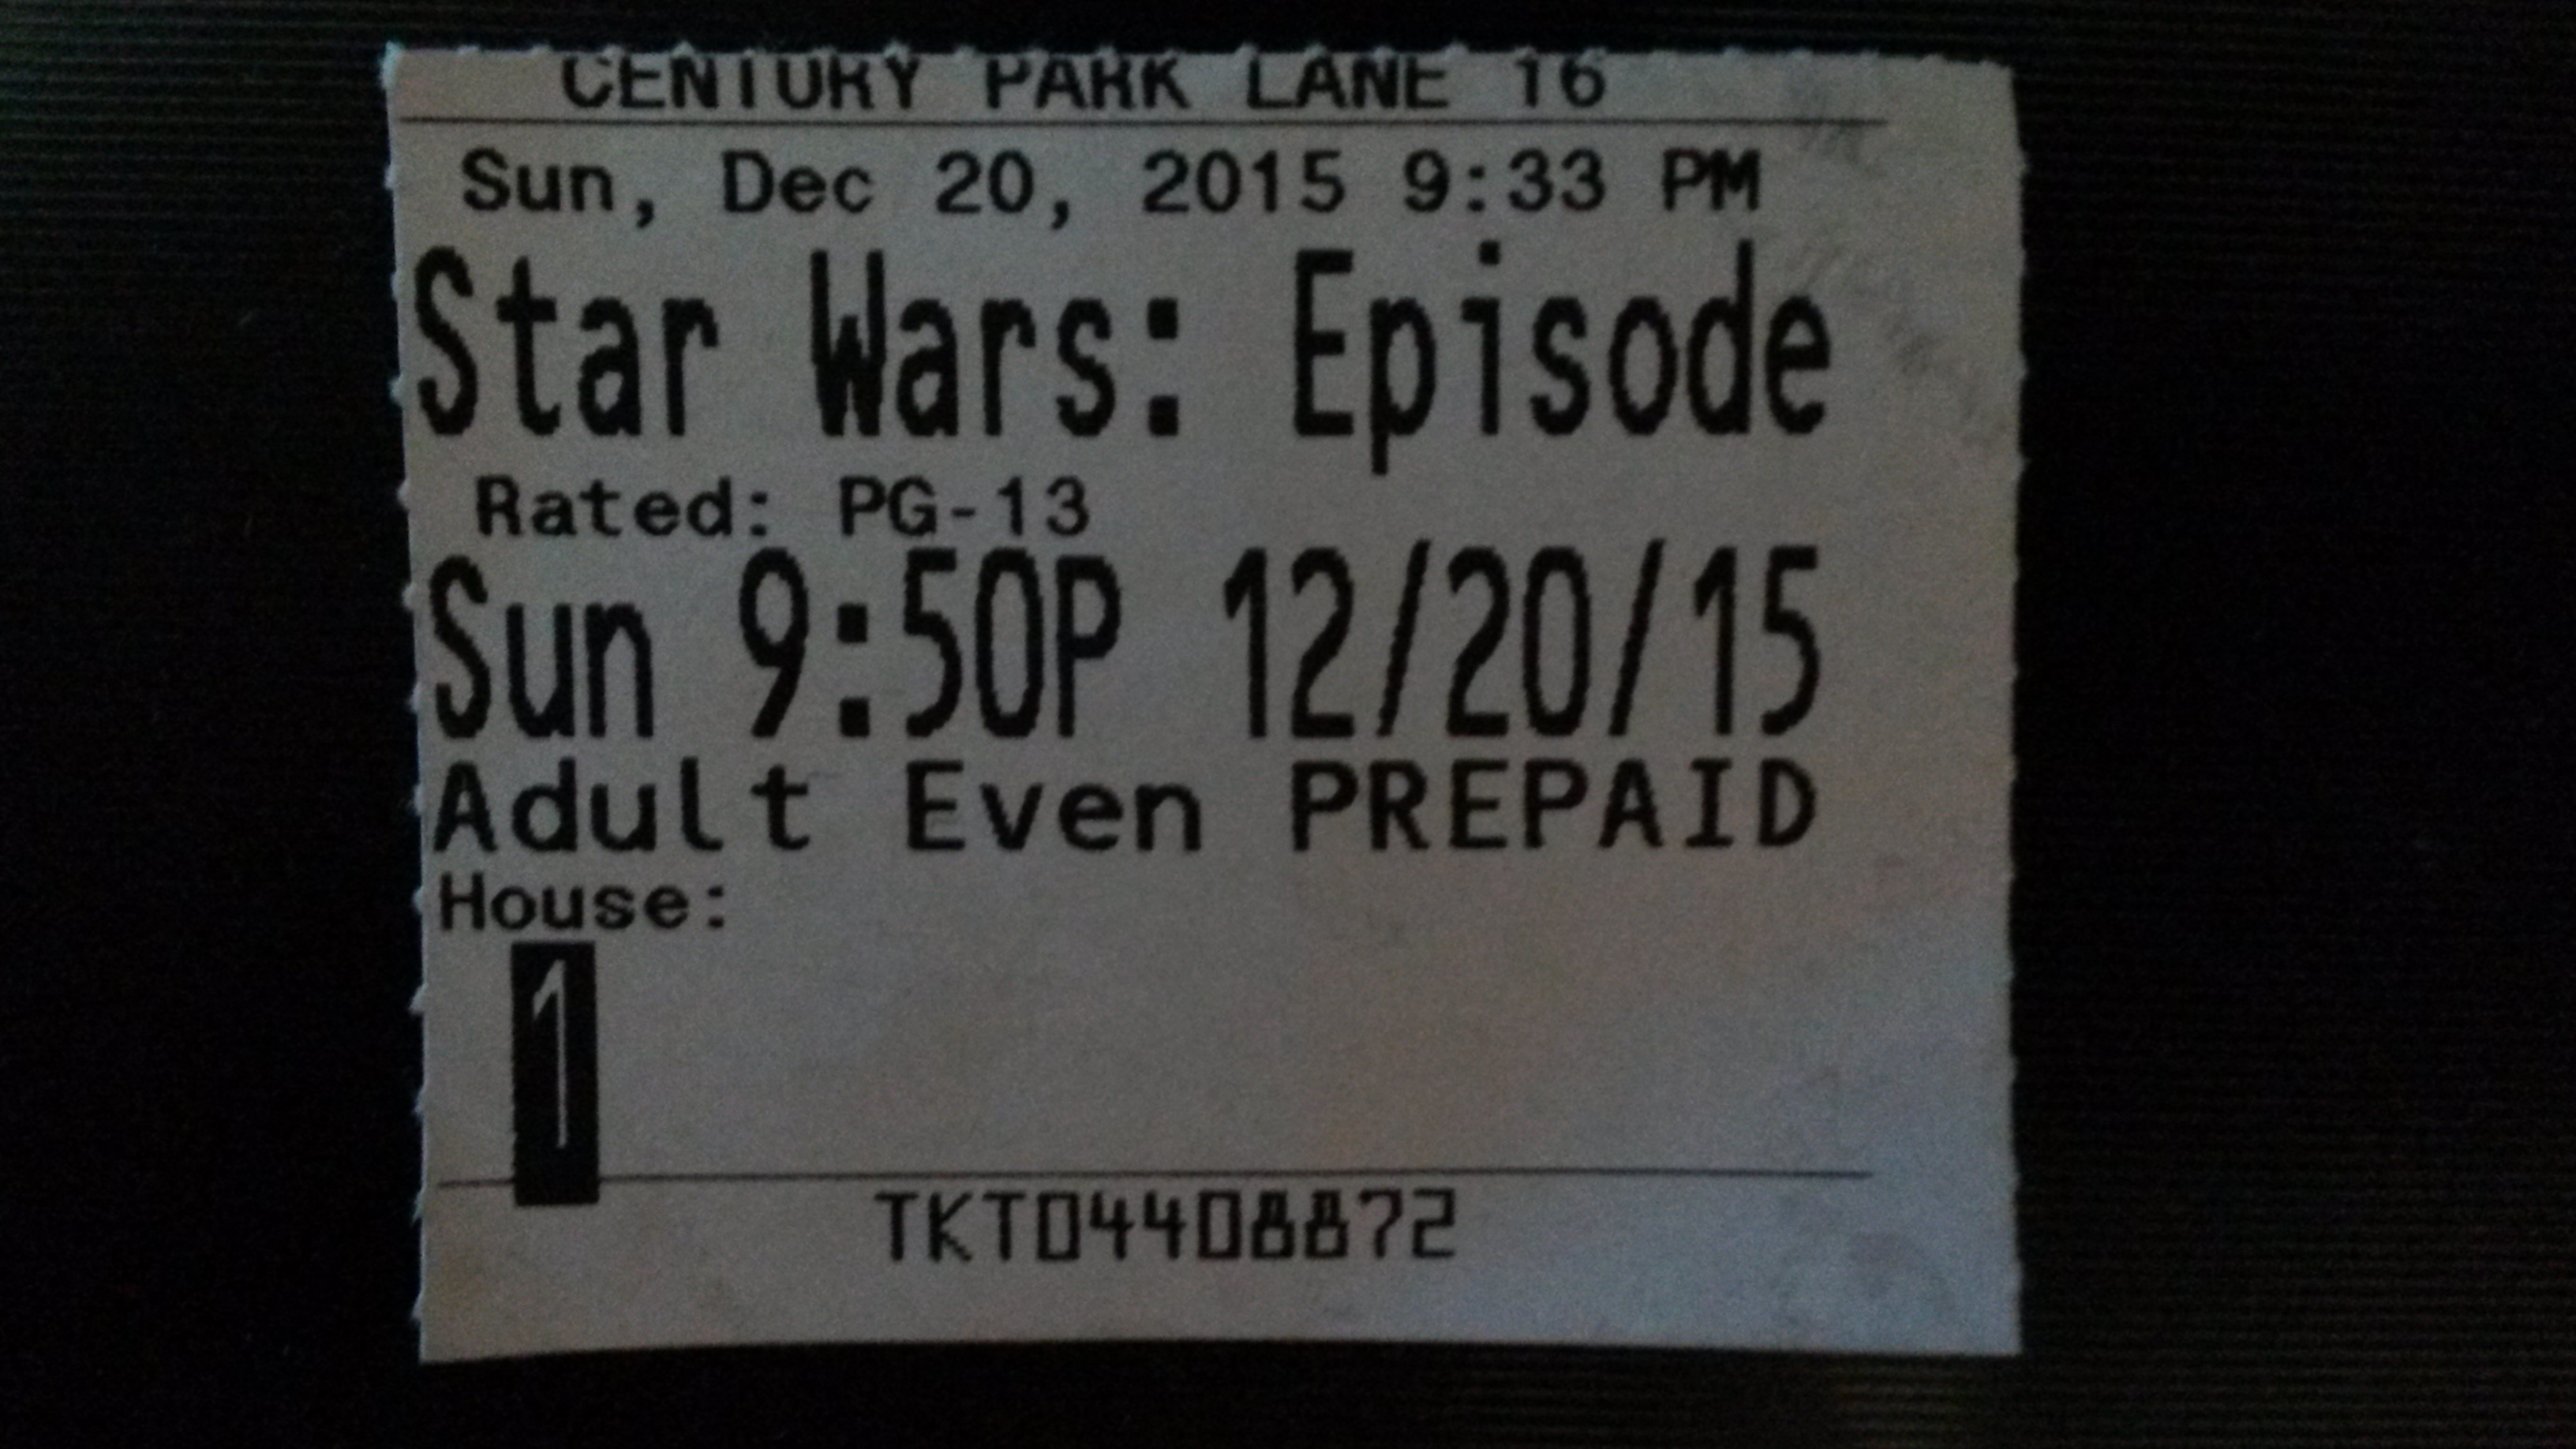 Saw Star Wars VII: The Force Awakens last Sunday night. I have mixed feeling about the movie.